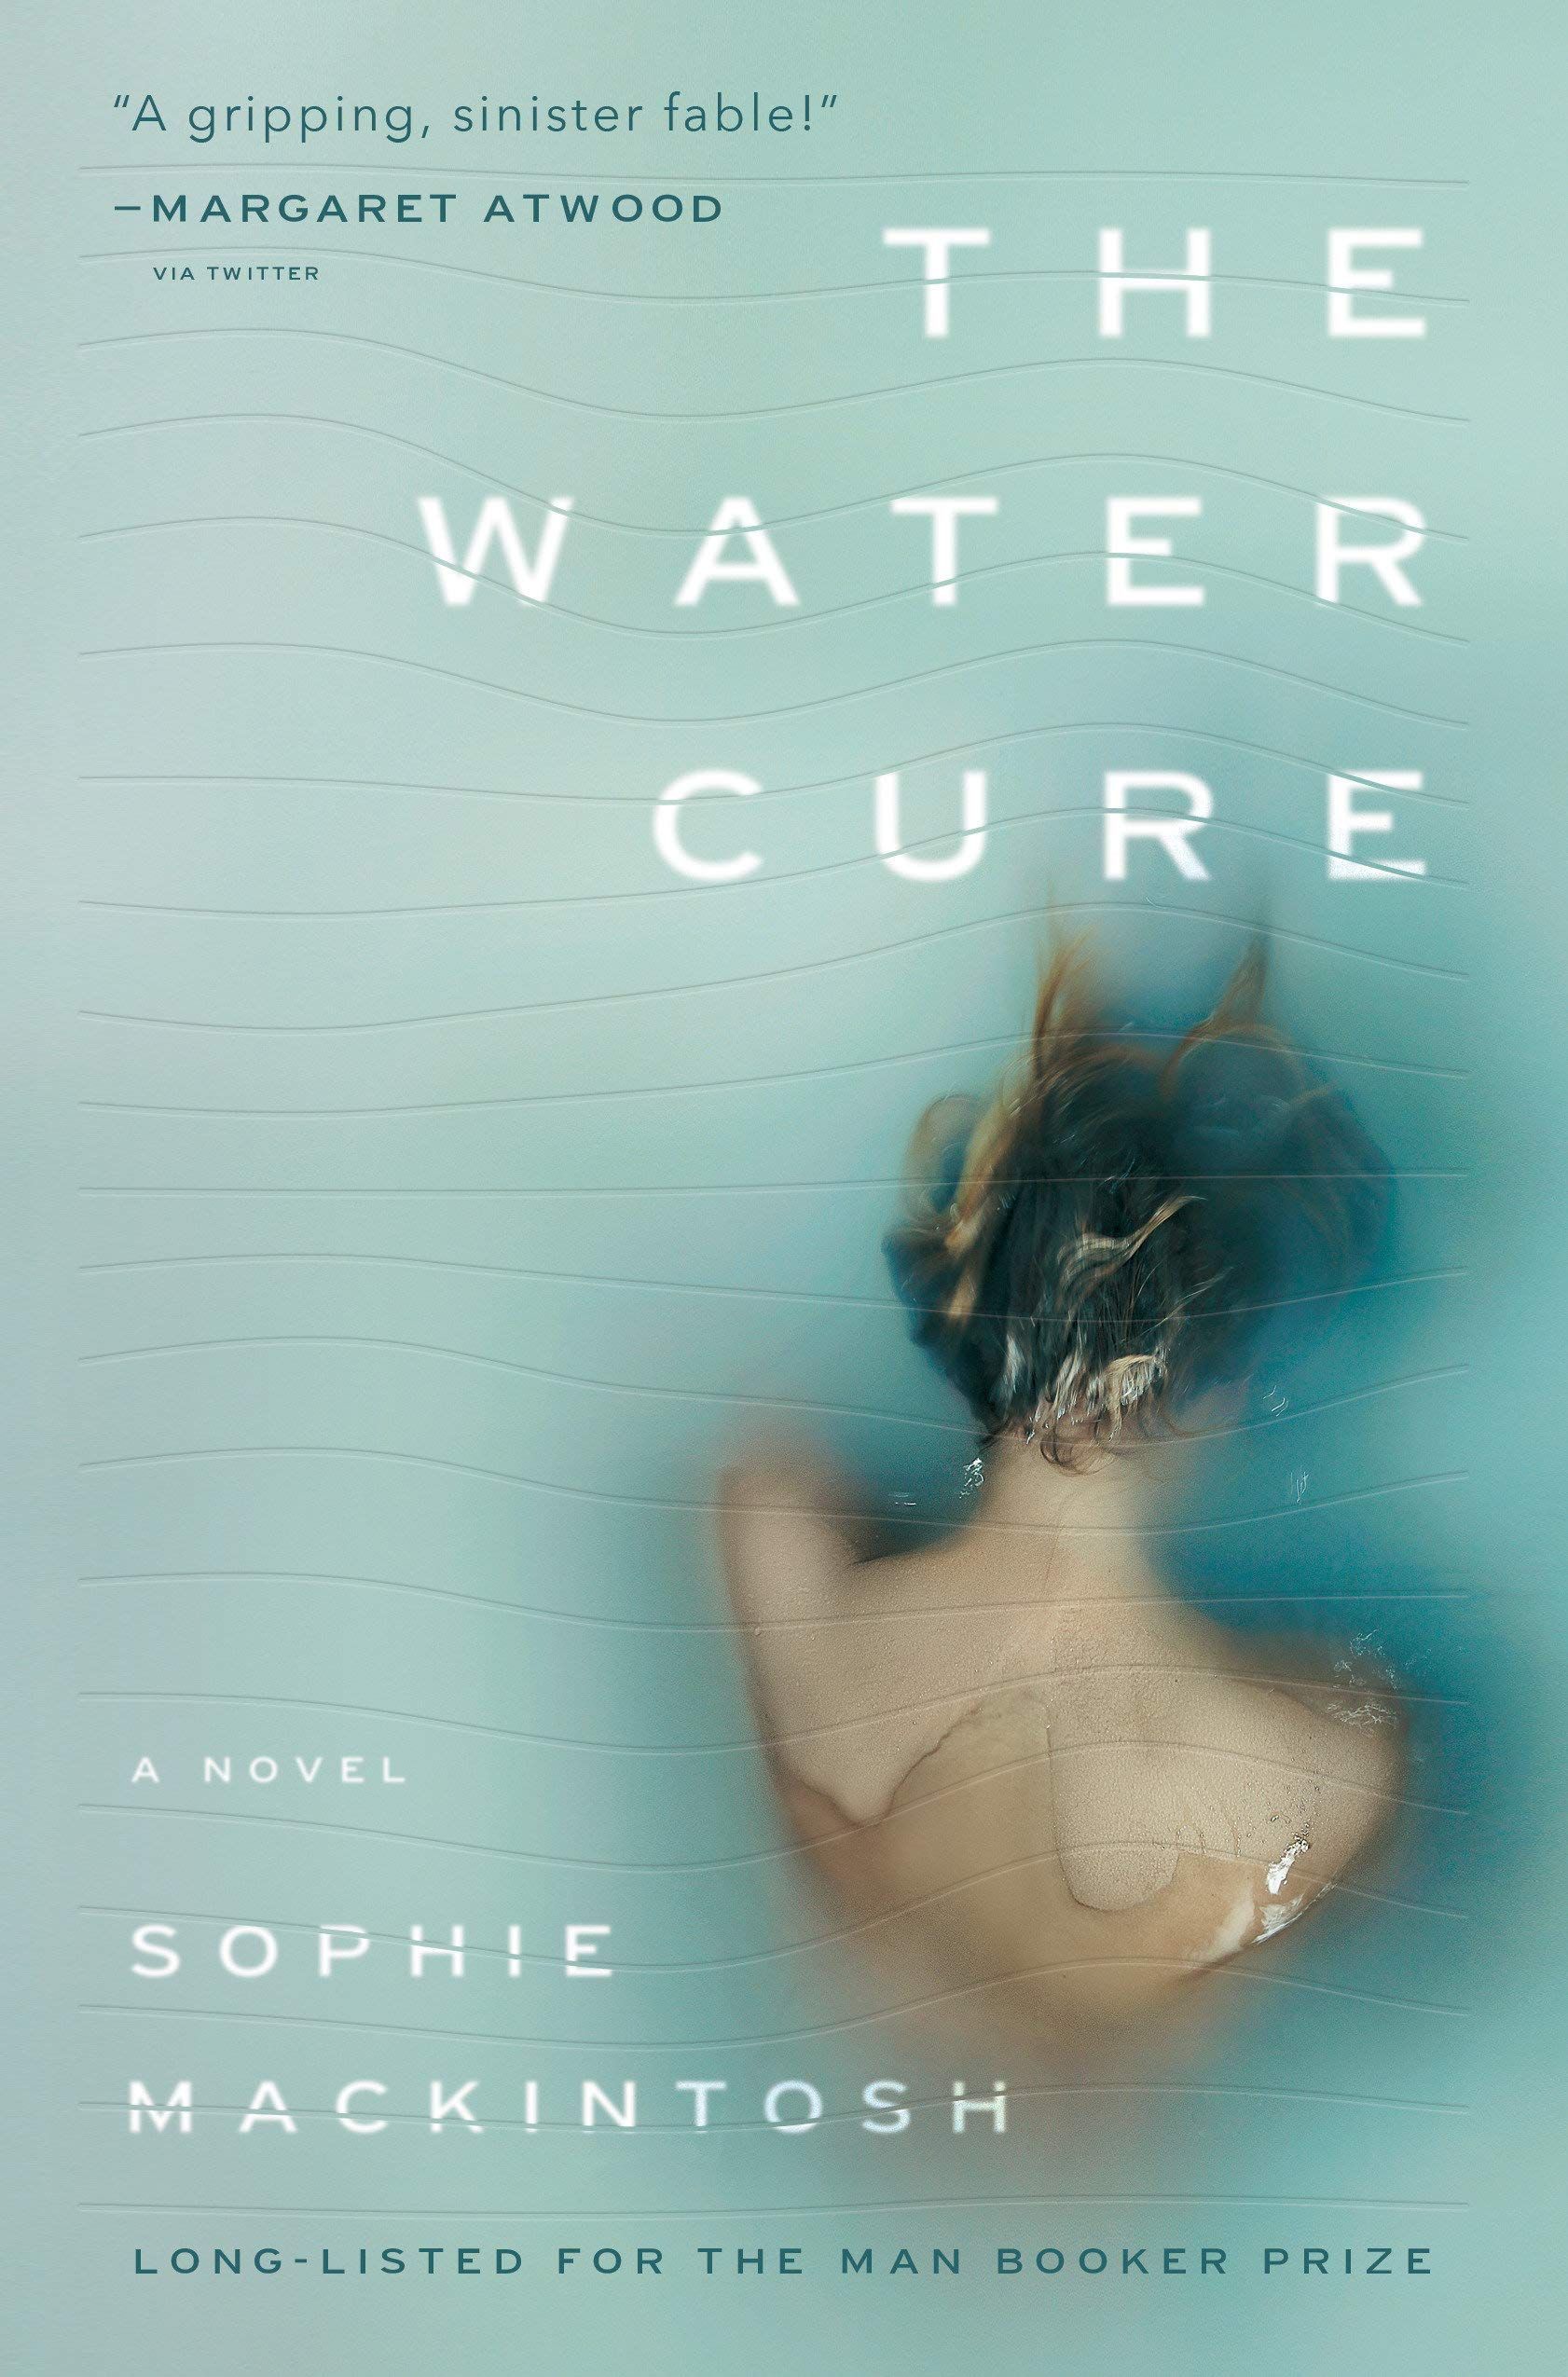 Boundary Lines: Sophie Mackintosh’s “The Water Cure”